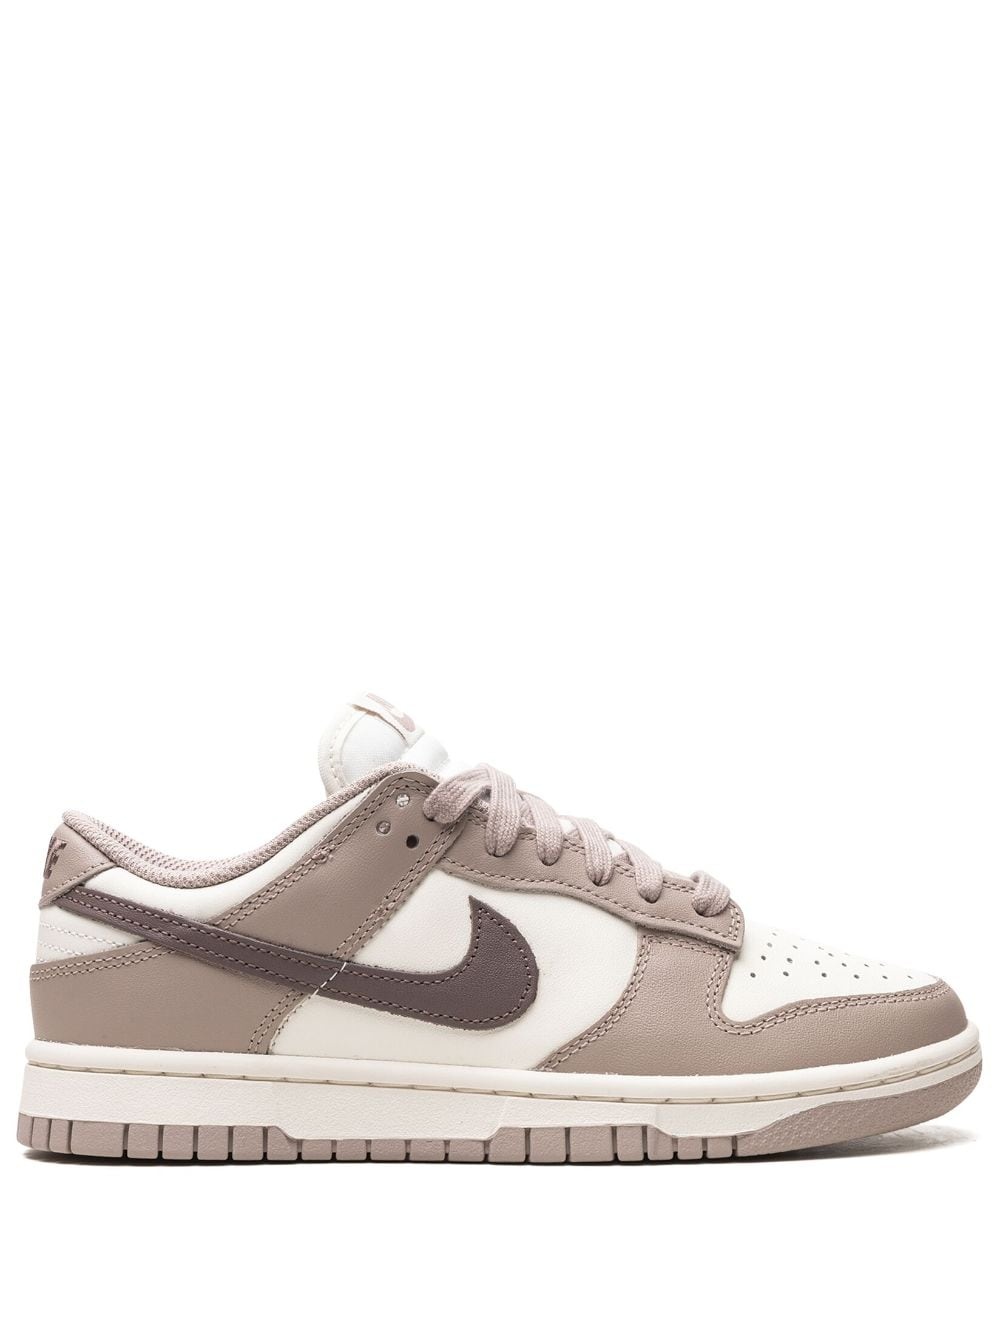 Dunk Low "Diffused Taupe" sneakers - 1